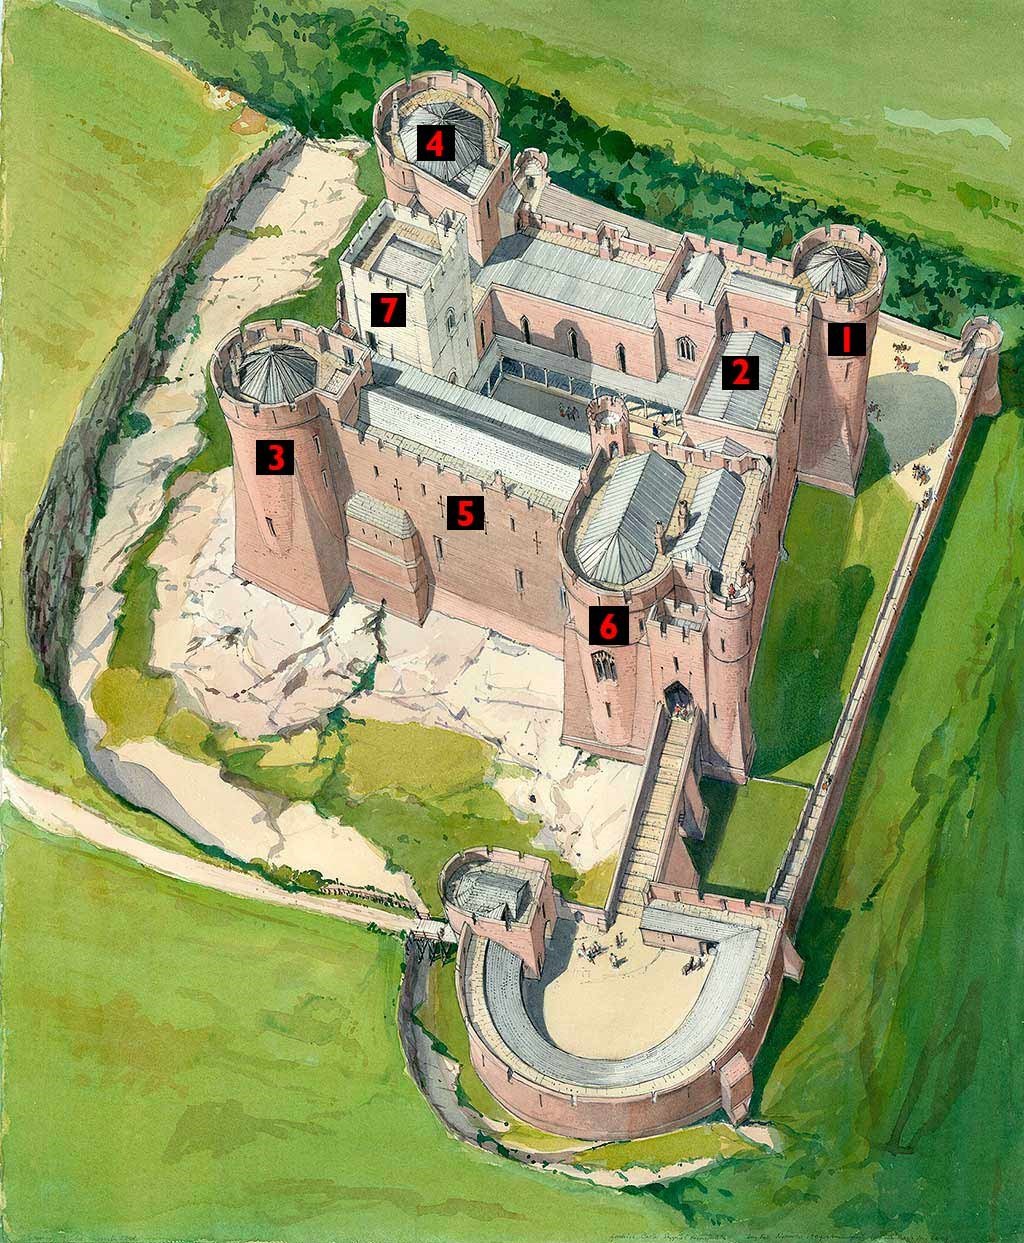 Goodrich Castle as it may have looked in the late Middle Ages